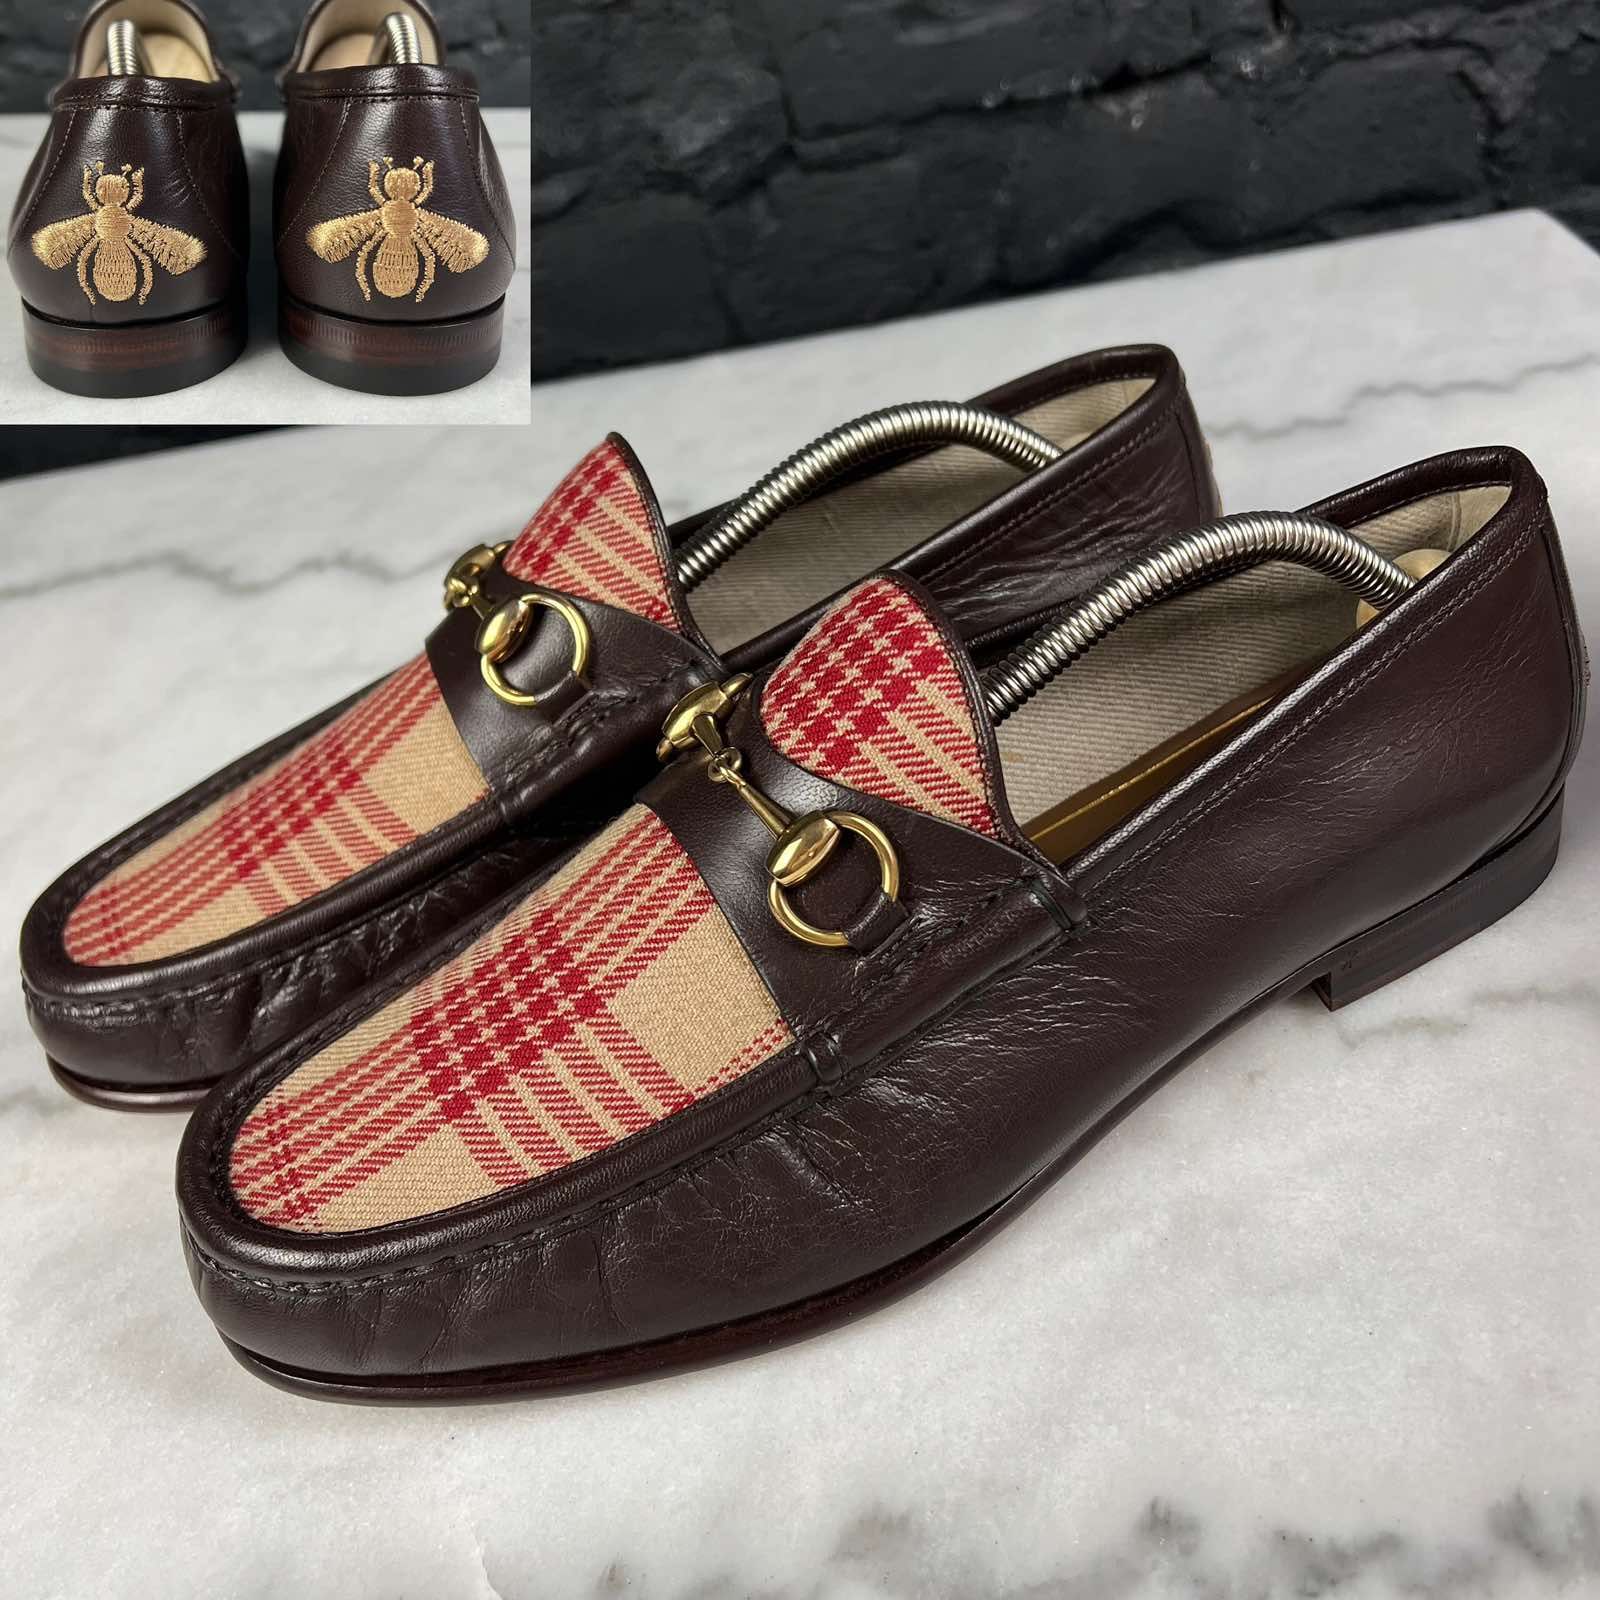 Pre-owned Gucci 1953 Horsebit Loafers Tartan Plaid Leather 9 G In Brown